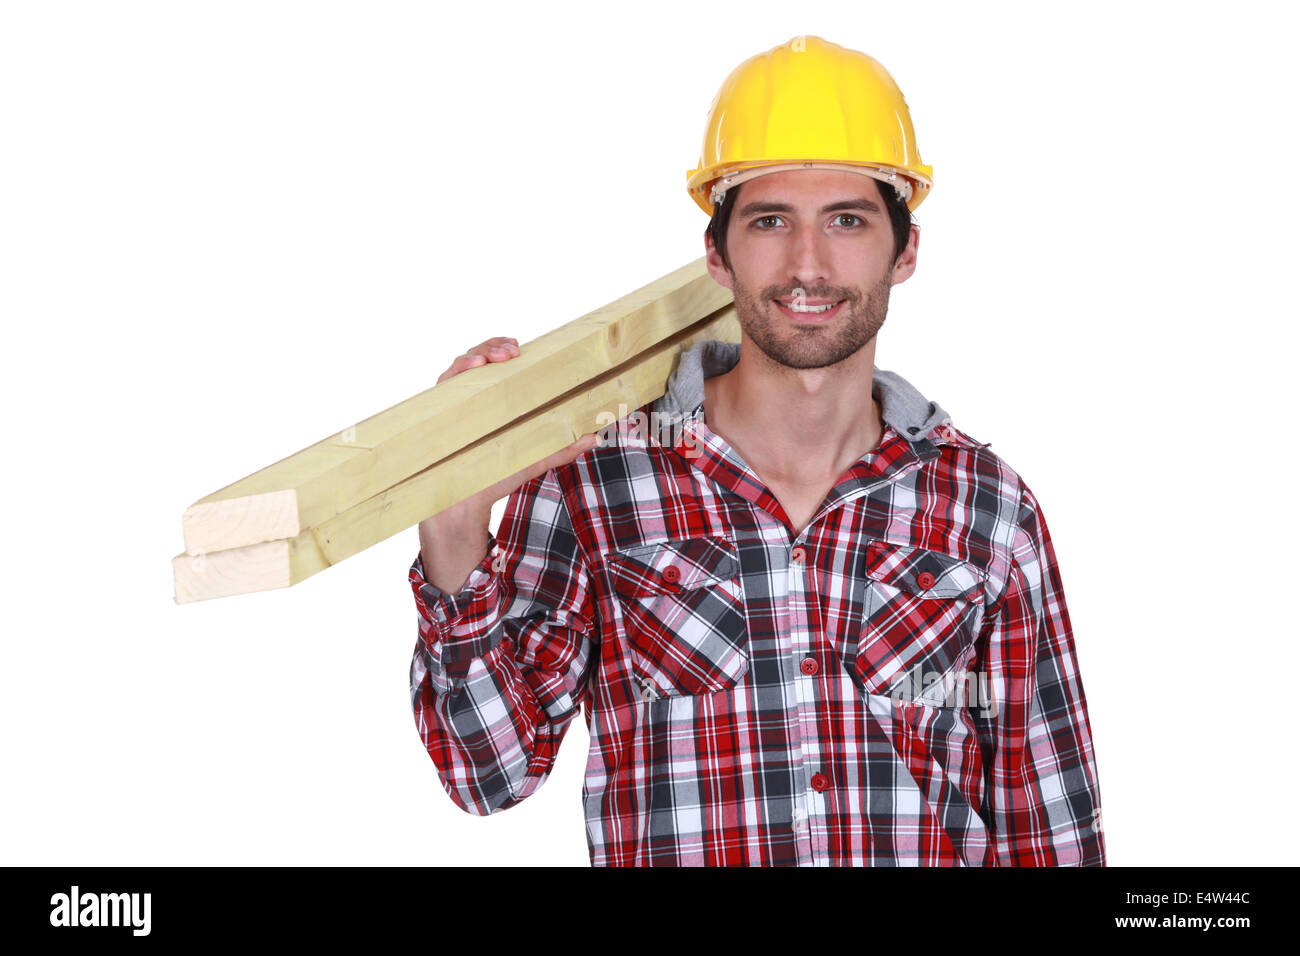 Tradesman carrying wooden planks Stock Photo